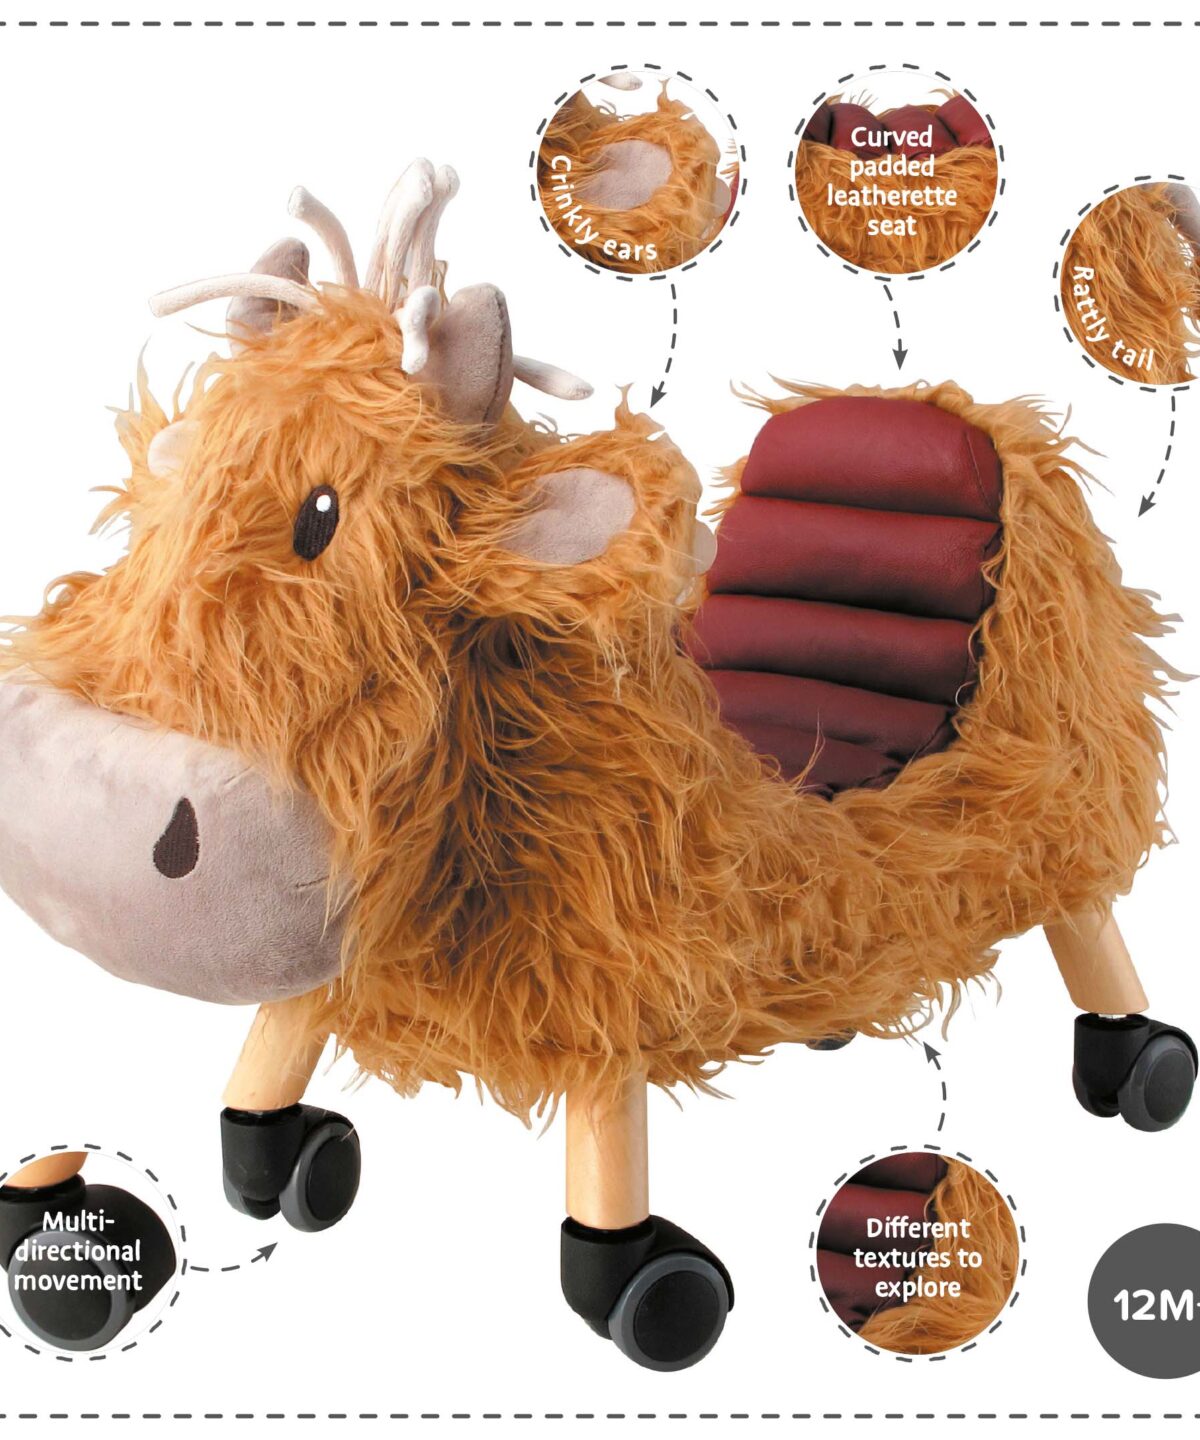 Features and benefits displayed for Hubert Highland Cow Ride On Toy